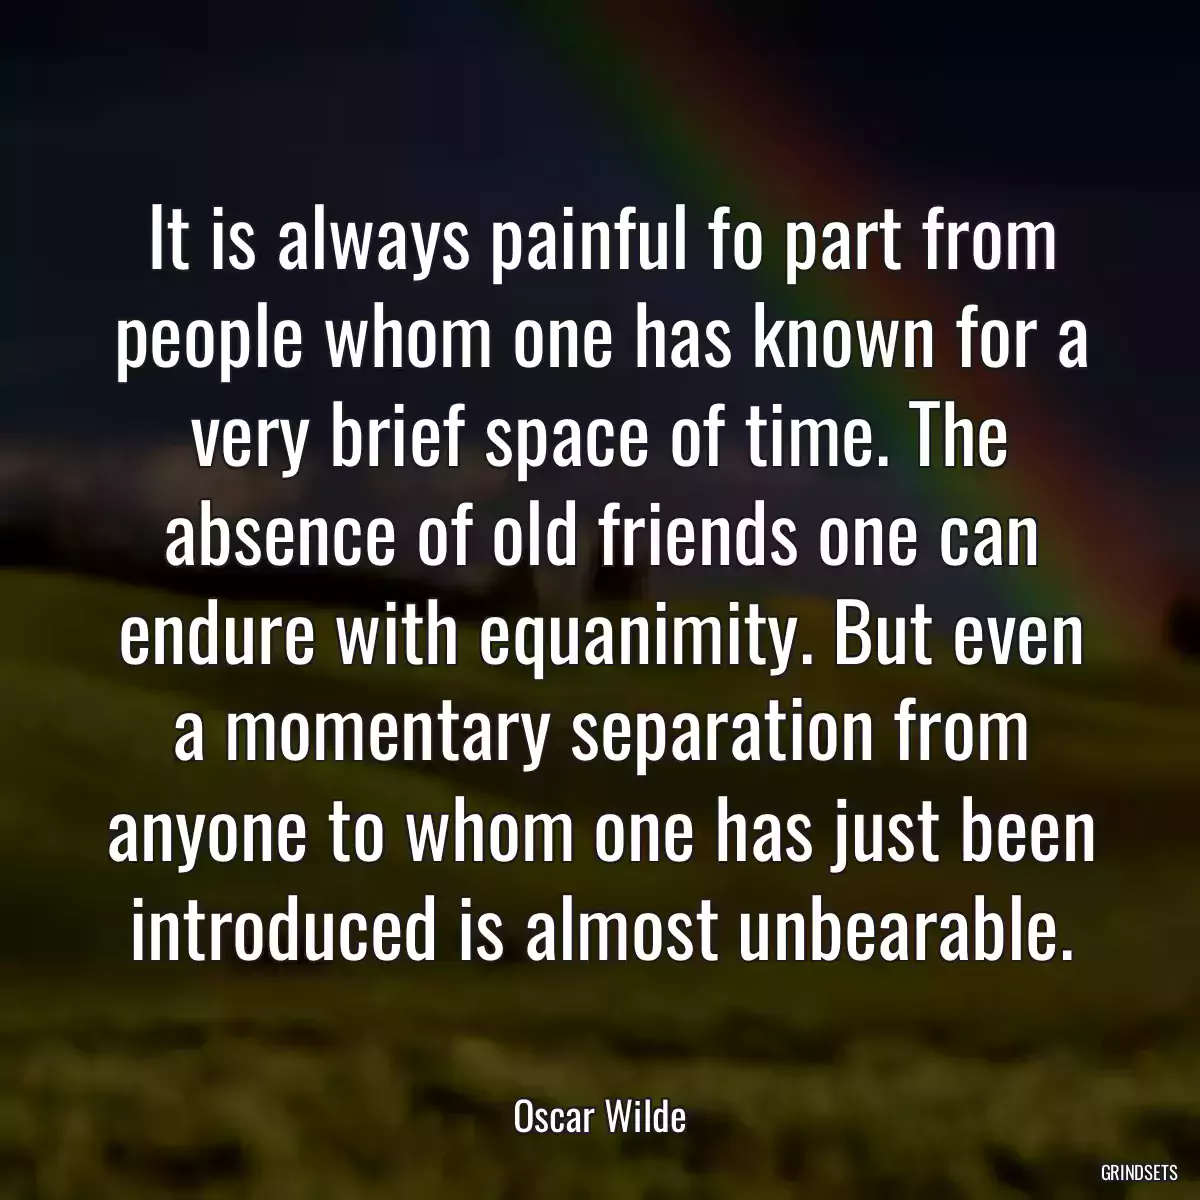 It is always painful fo part from people whom one has known for a very brief space of time. The absence of old friends one can endure with equanimity. But even a momentary separation from anyone to whom one has just been introduced is almost unbearable.